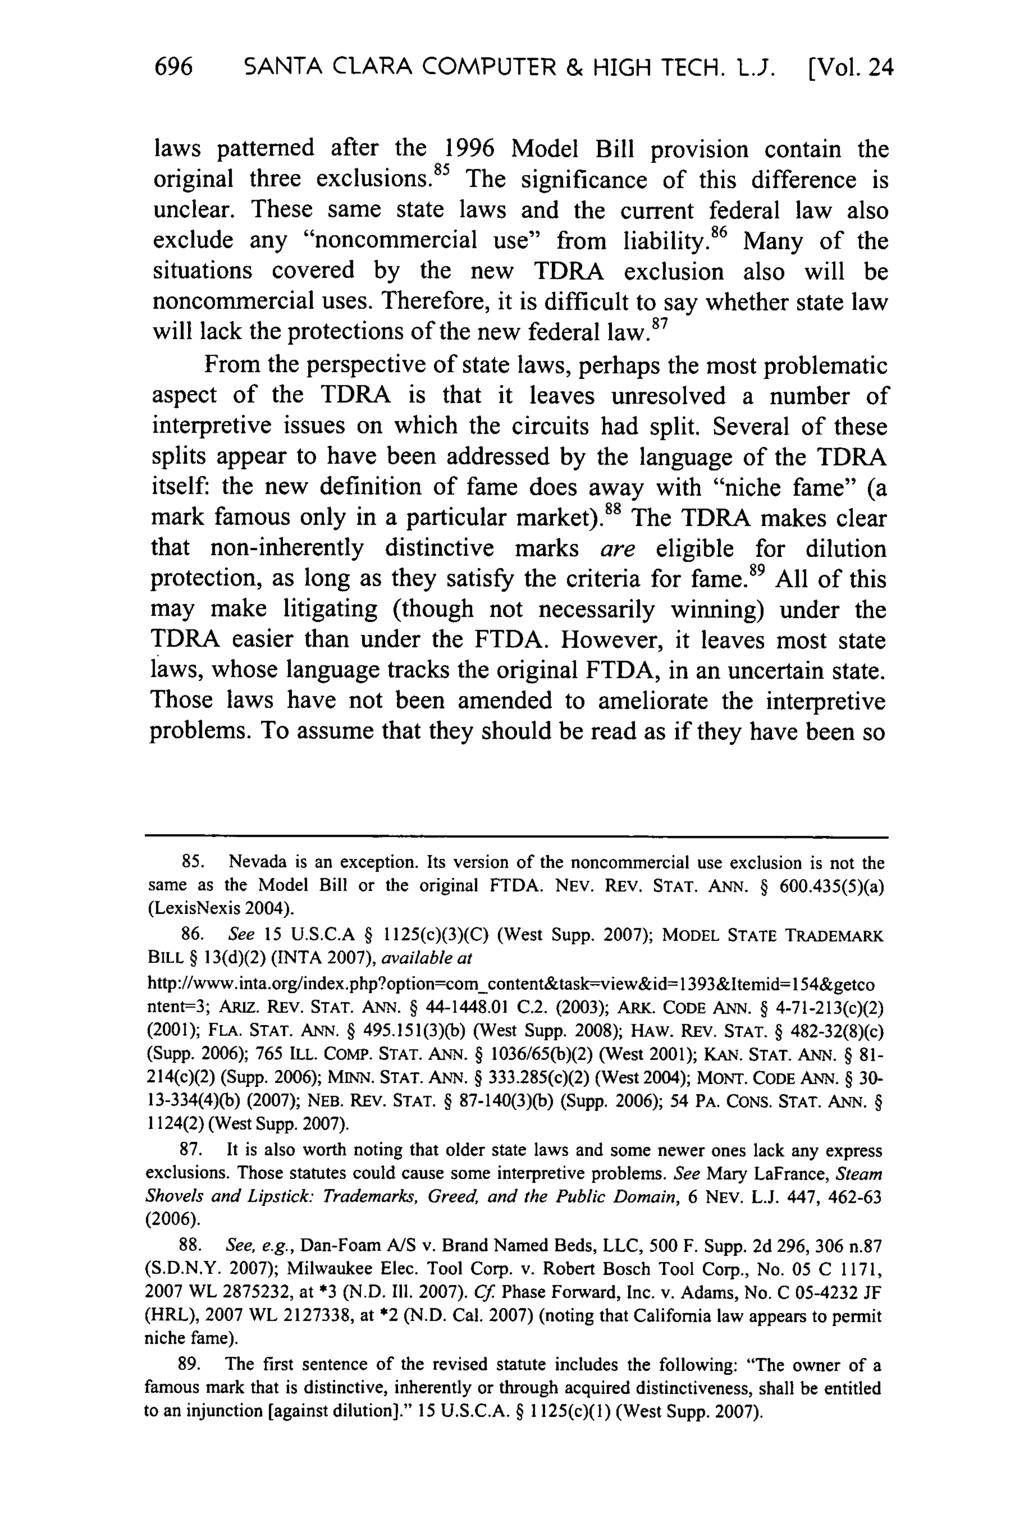 696 SANTA CLARA COMPUTER & HIGH TECH. L.J. [Vol. 24 laws patterned after the 1996 Model Bill provision contain the original three exclusions. 8 5 The significance of this difference is unclear.